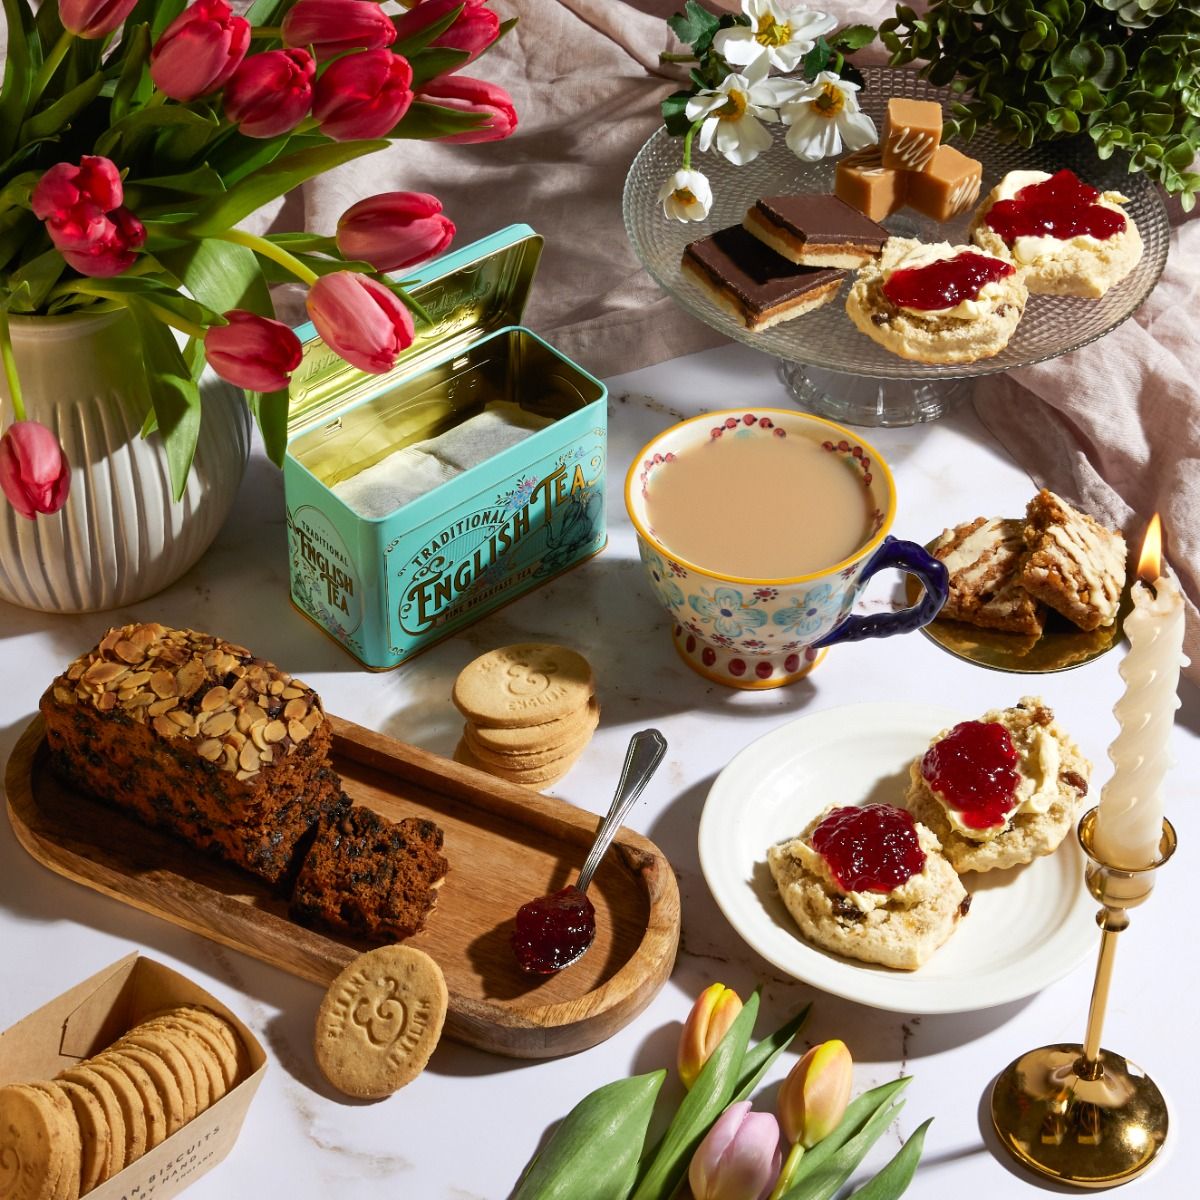 A cup of tea surrounded by cake, flowers and a tin of tea bags